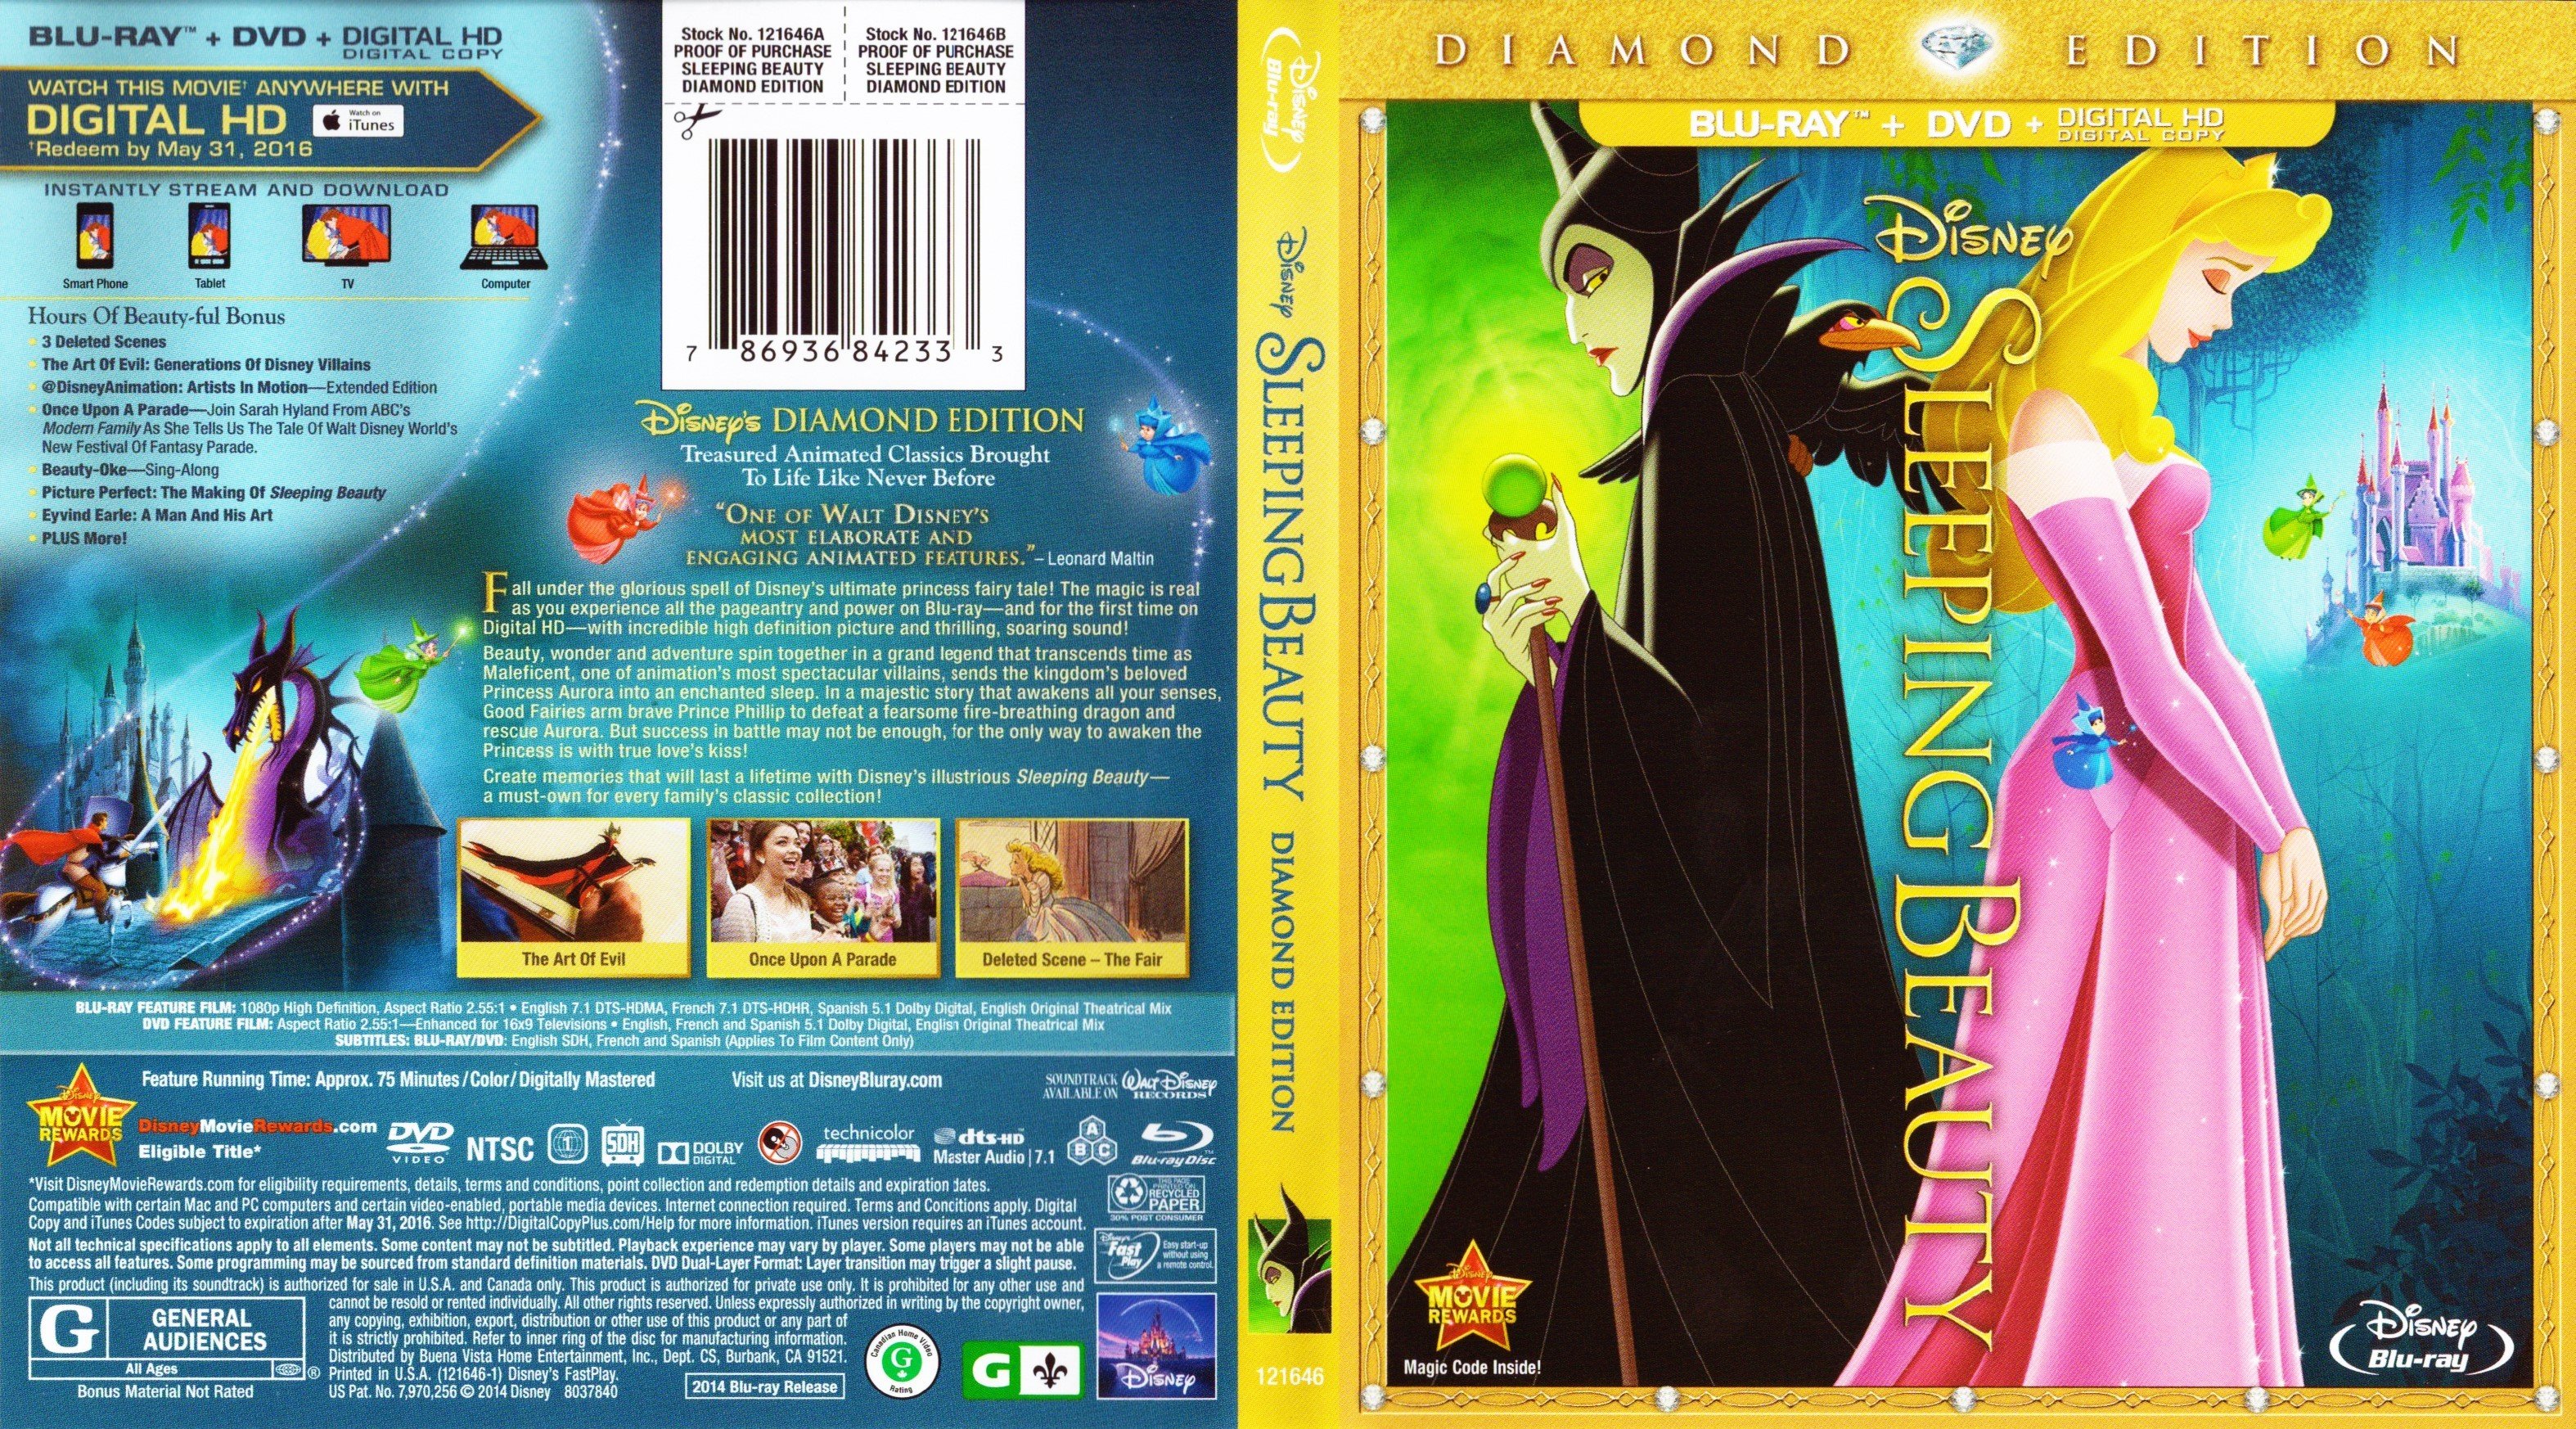 Sleeping Beauty 1959 Blu Ray Covers Cover Century Over 1 000 000 Album Art Covers For Free